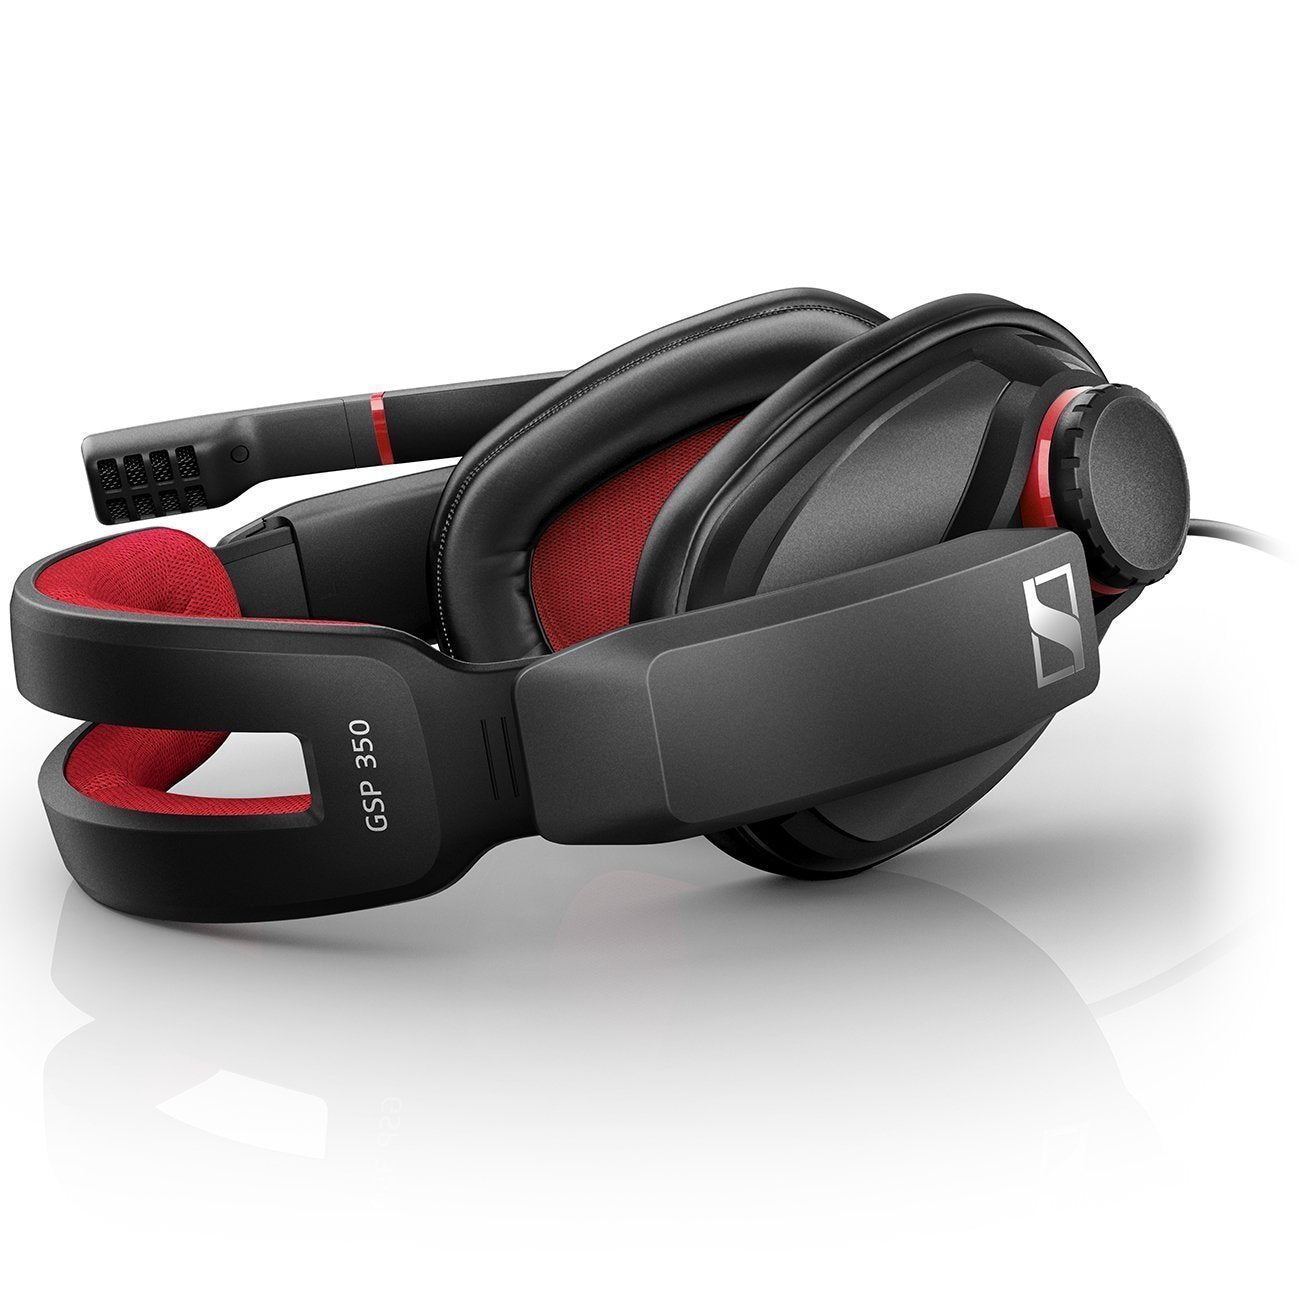 Sennheiser GSP 350 PC Gaming Headset with Dolby 7.1 Surround Sound